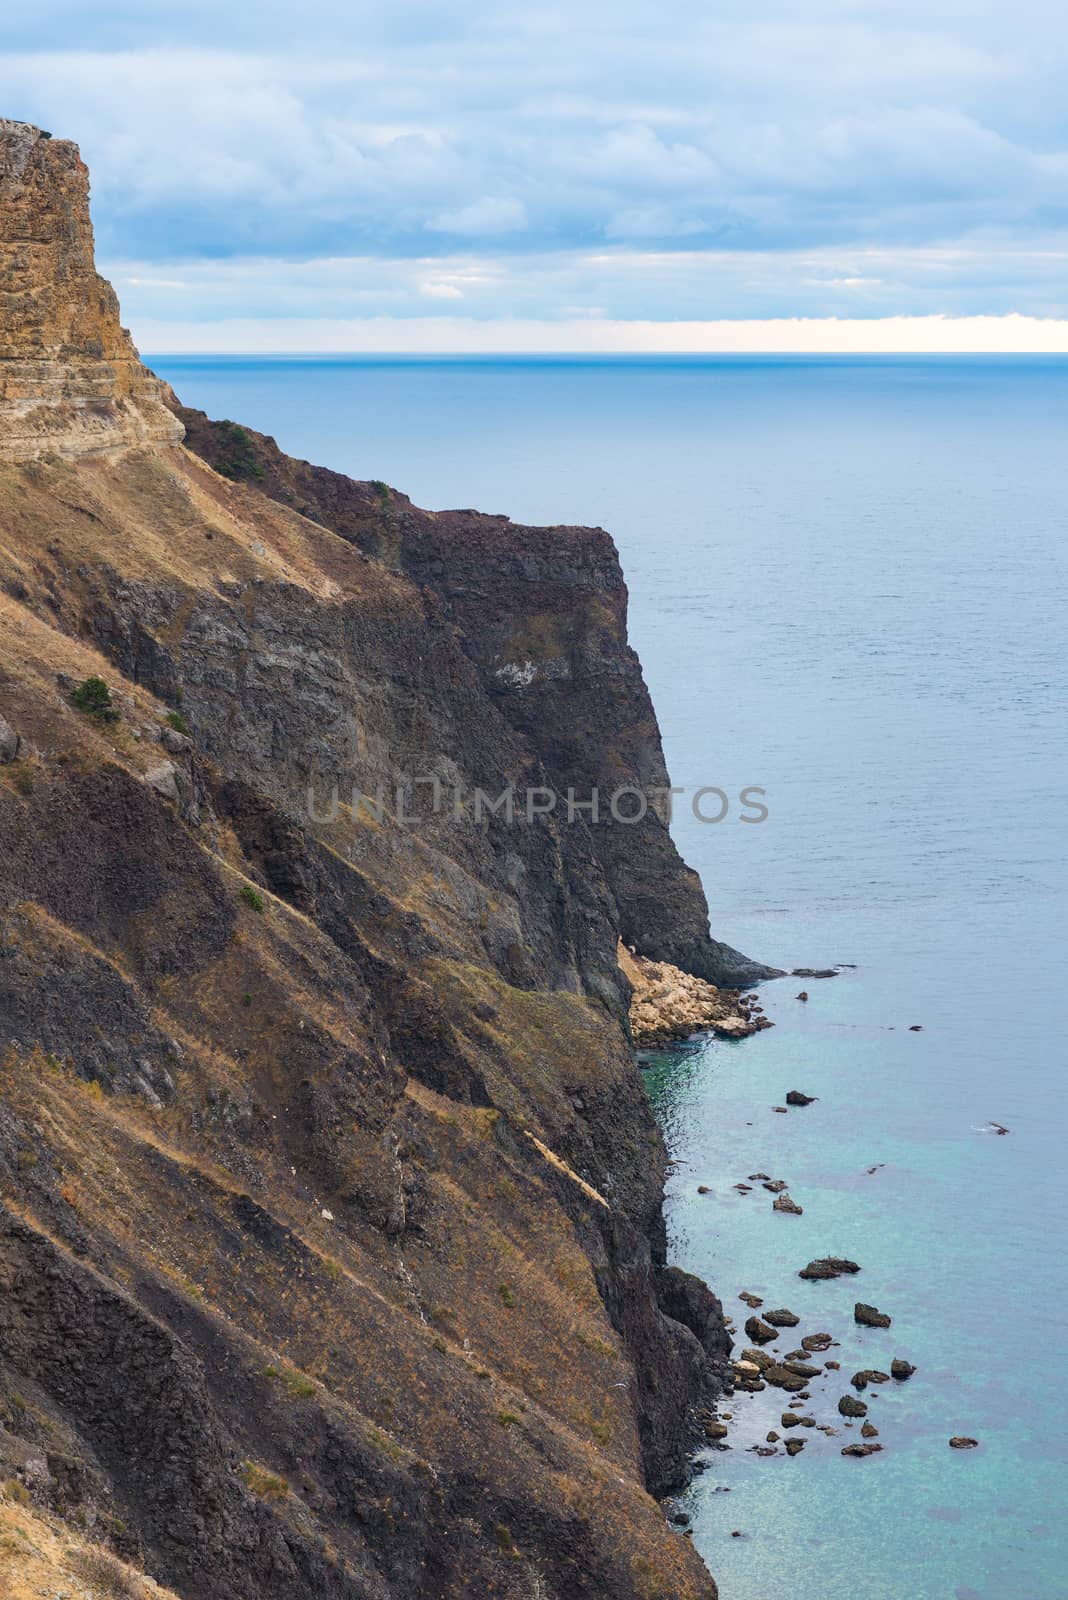 View of the rocky picturesque shore and the sea, the Crimea peninsula